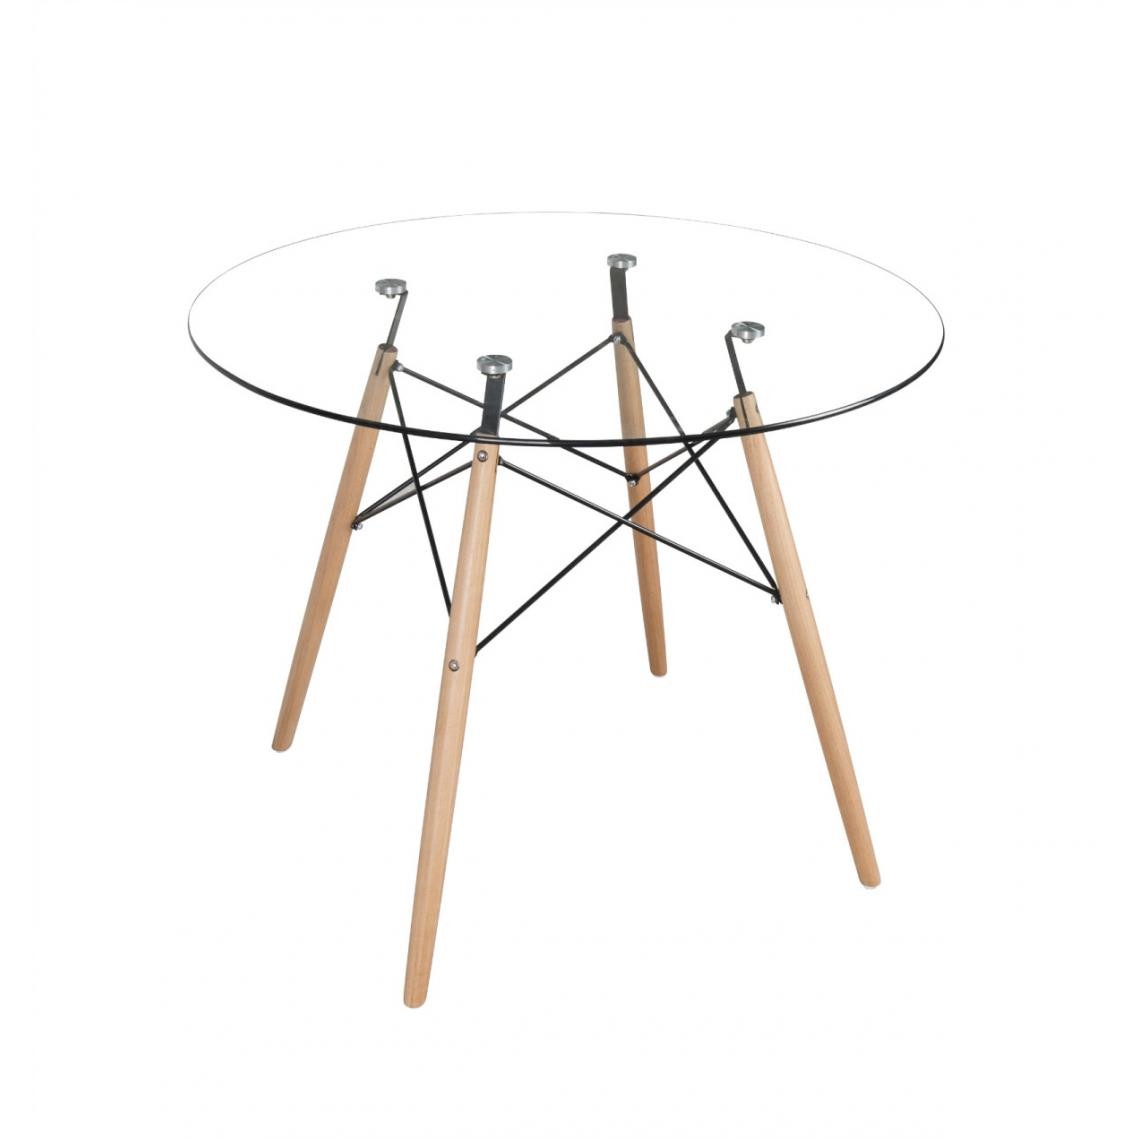 Italian Design - TABLE NORWAY RONDE - Tables à manger